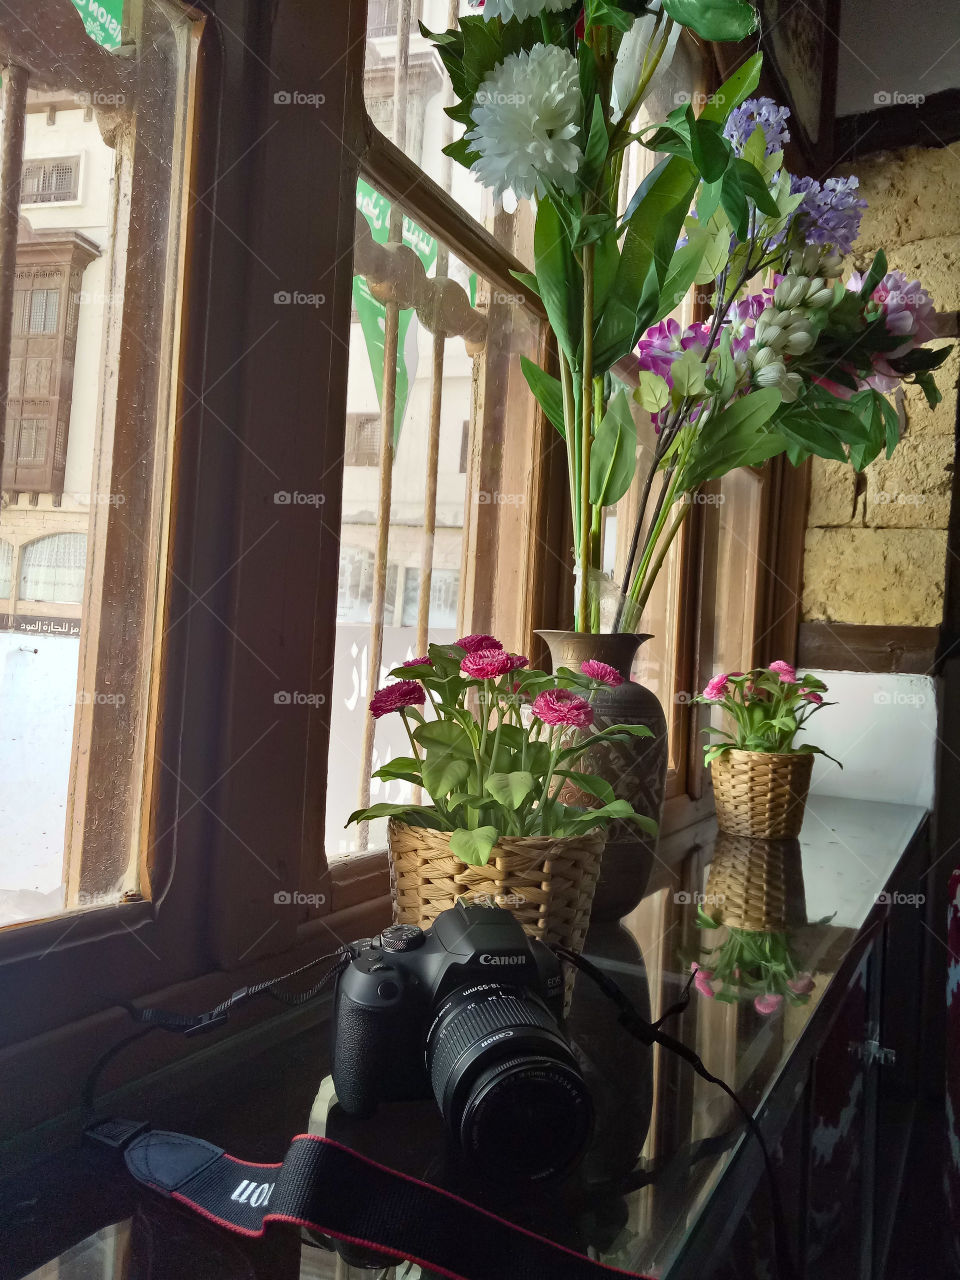 A small cafe with windows adorned with beautiful flowers, a perfect place to stay and relax for a while